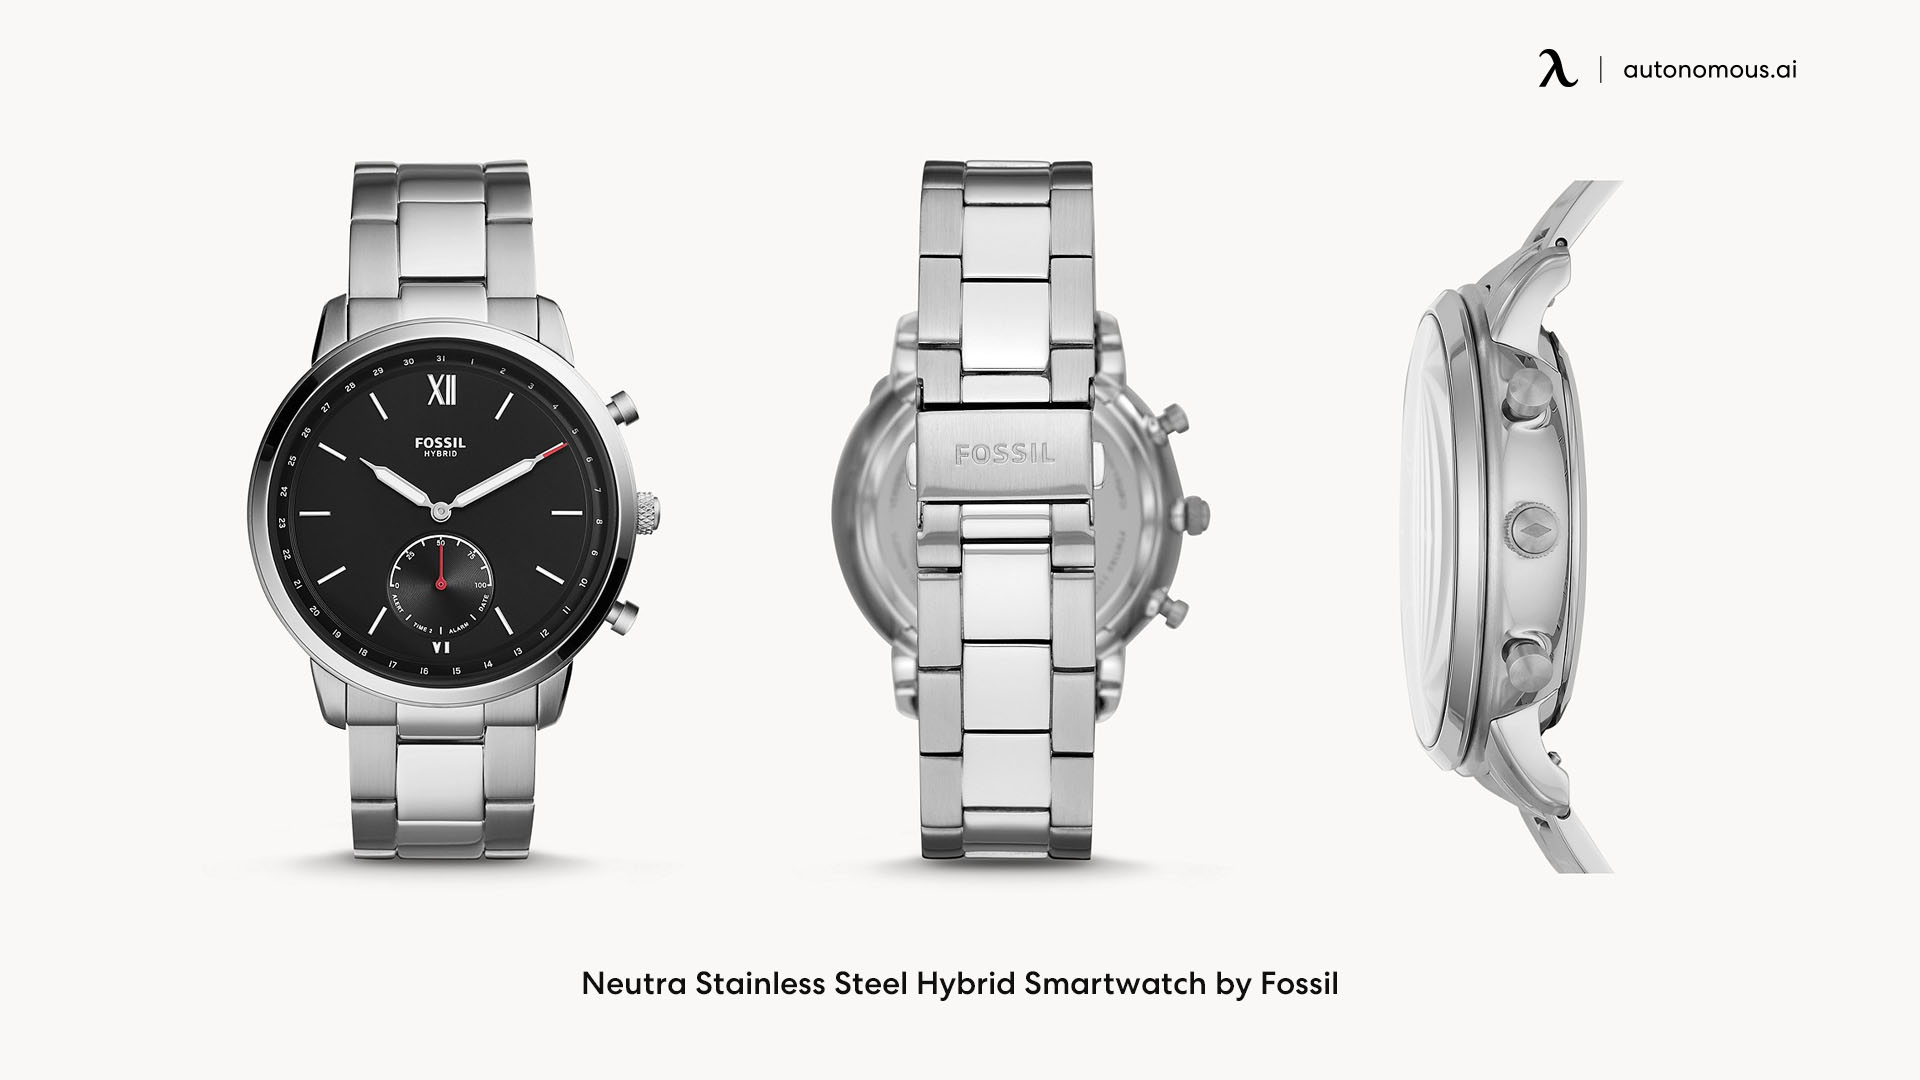 Neutra Stainless Steel Hybrid Smartwatch by Fossil